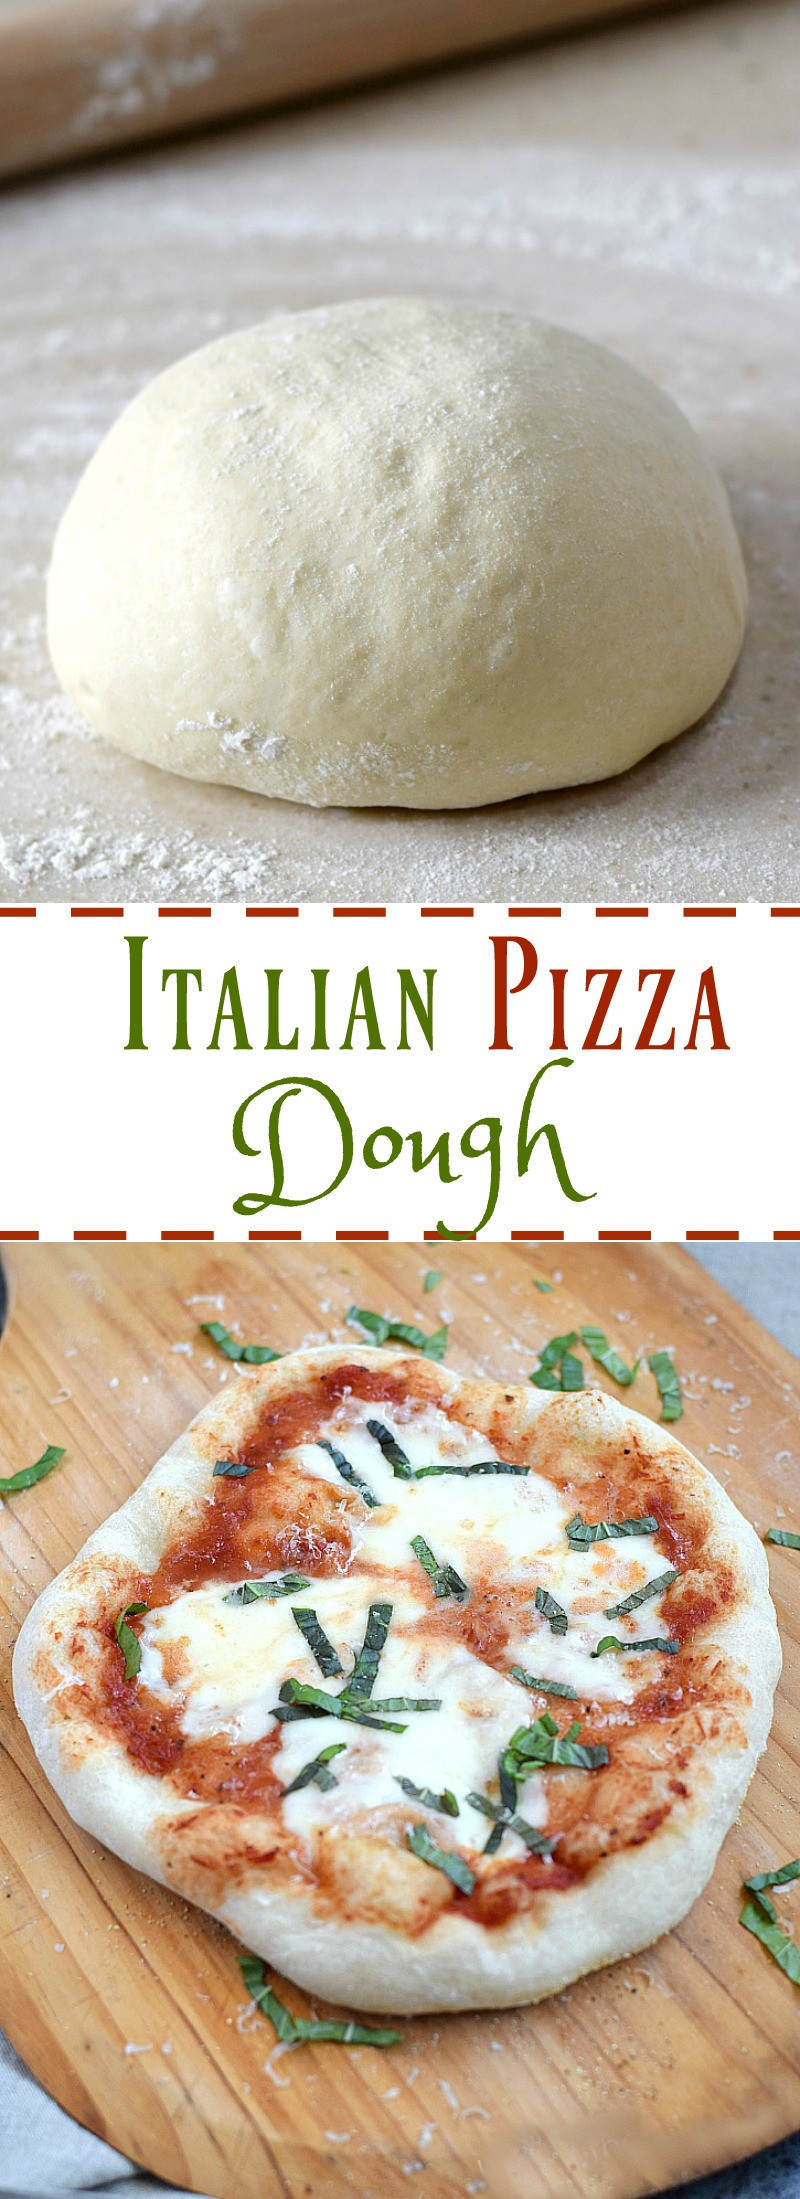 Authentic Italian Pizza Dough Recipes
 Italian Pizza Dough Cooking With Curls